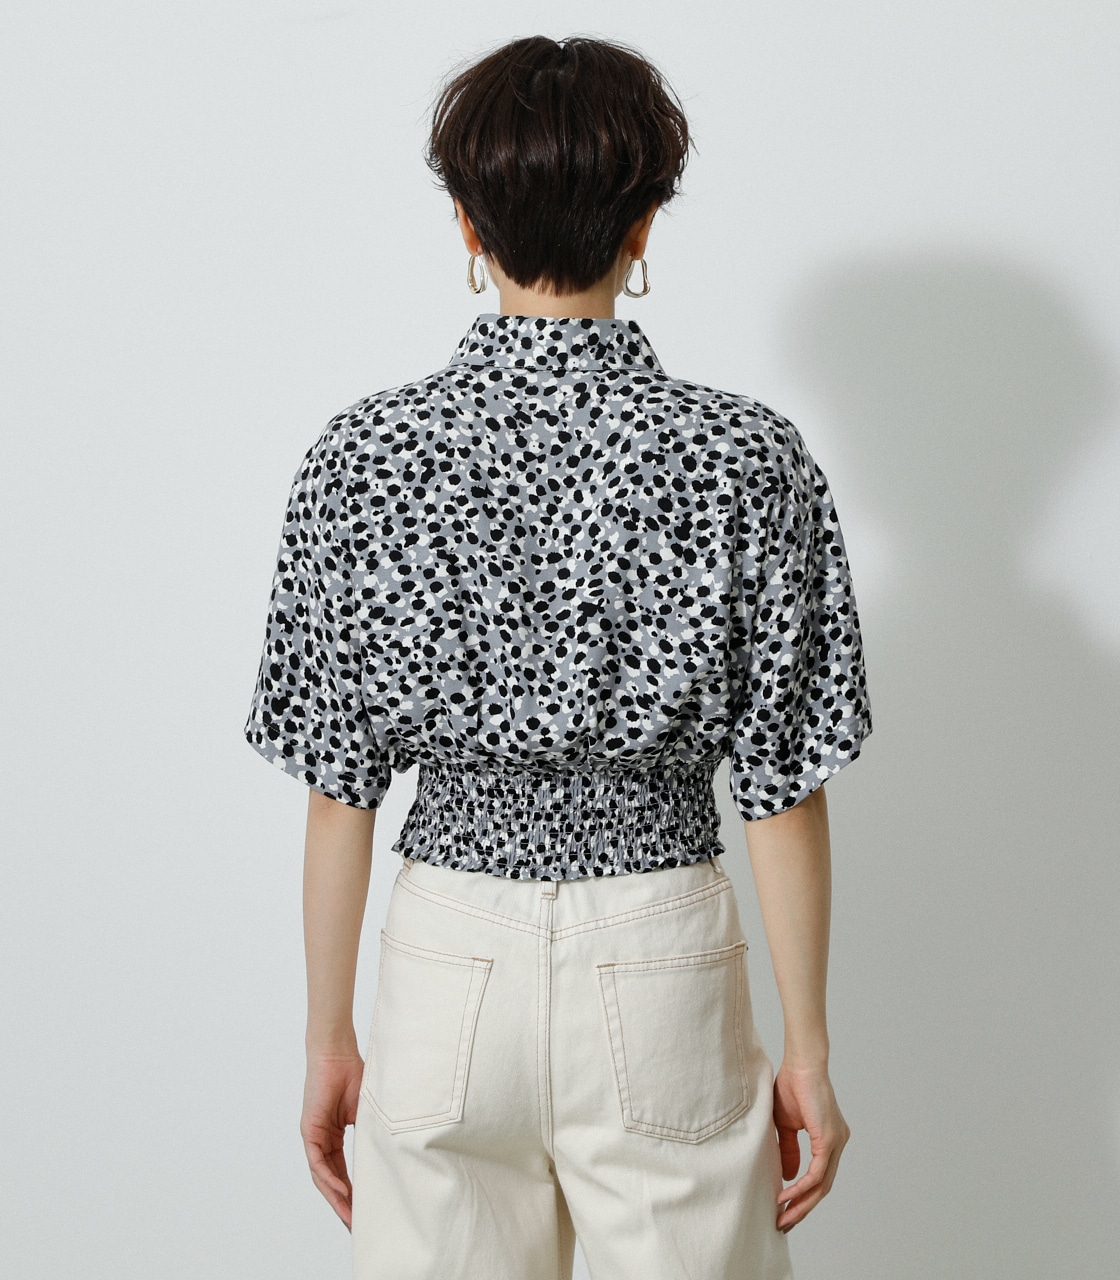 ECOVERO LEOPARD PRINT BLOUSE/エコヴェロレオパードプリントブラウス 詳細画像 柄GRY 7